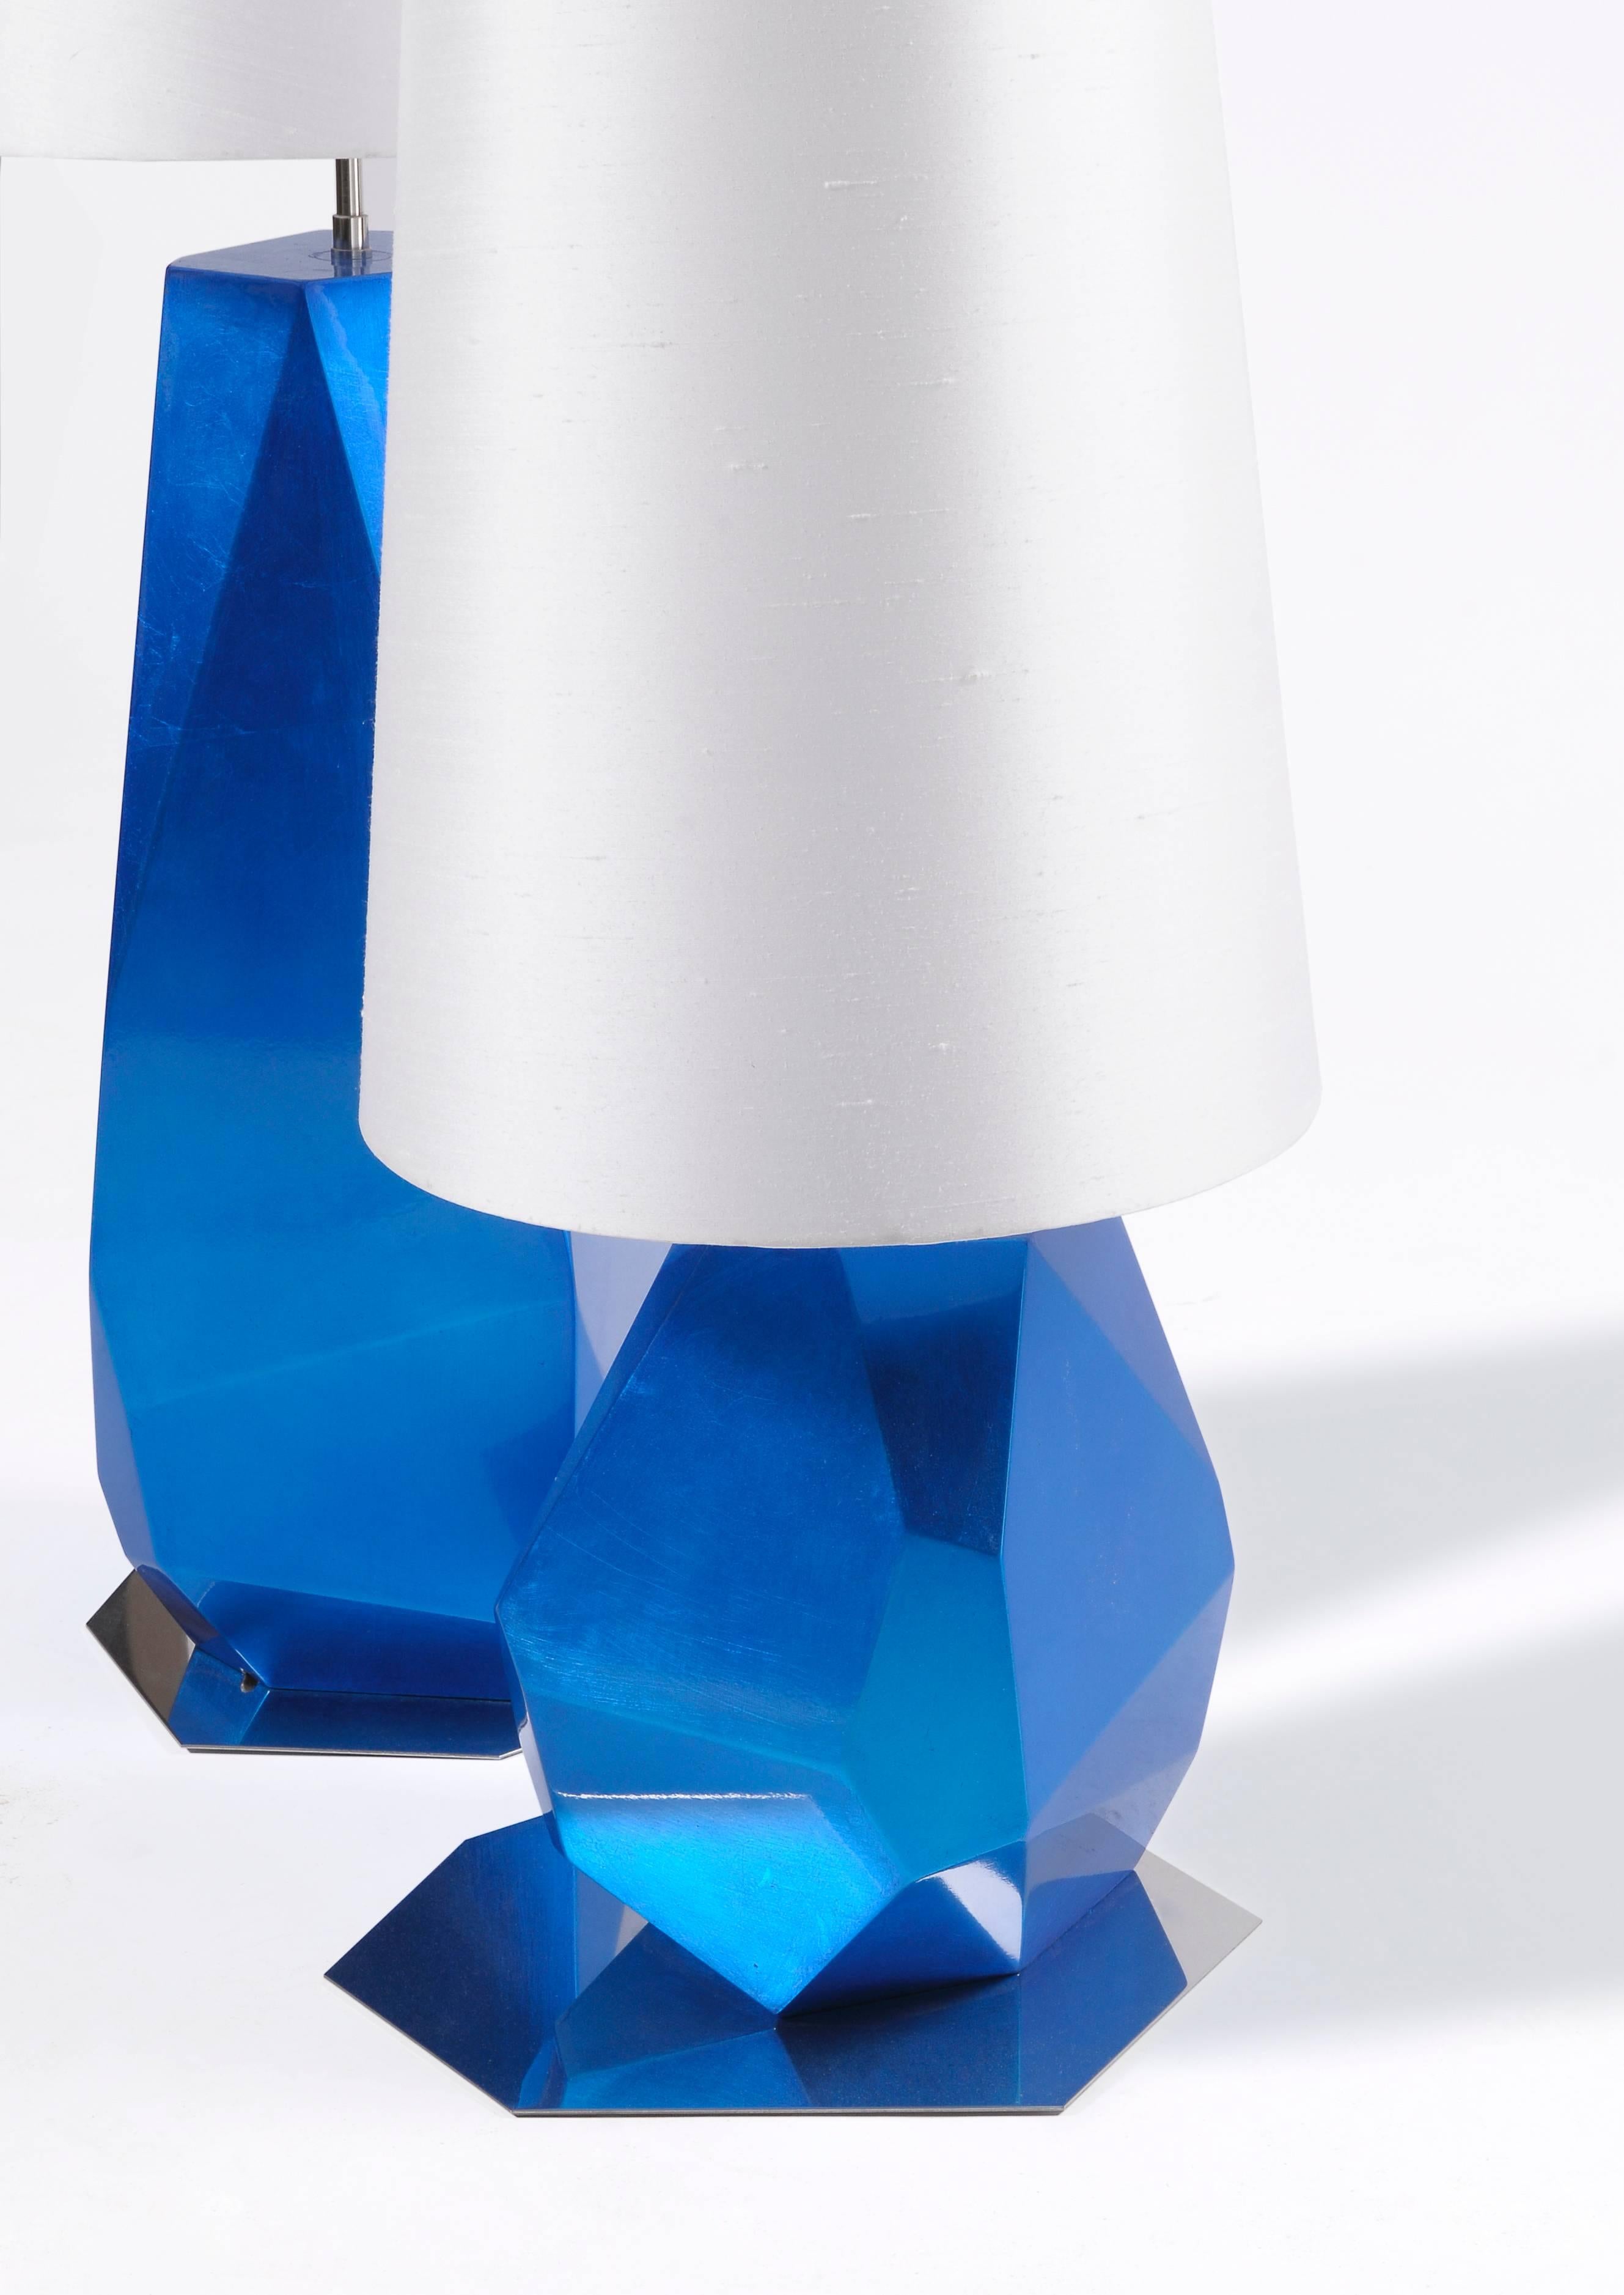 Stainless Steel Modern Sculptural green and blue Feel Table Lamps by Boca Do Lobo from Europe For Sale